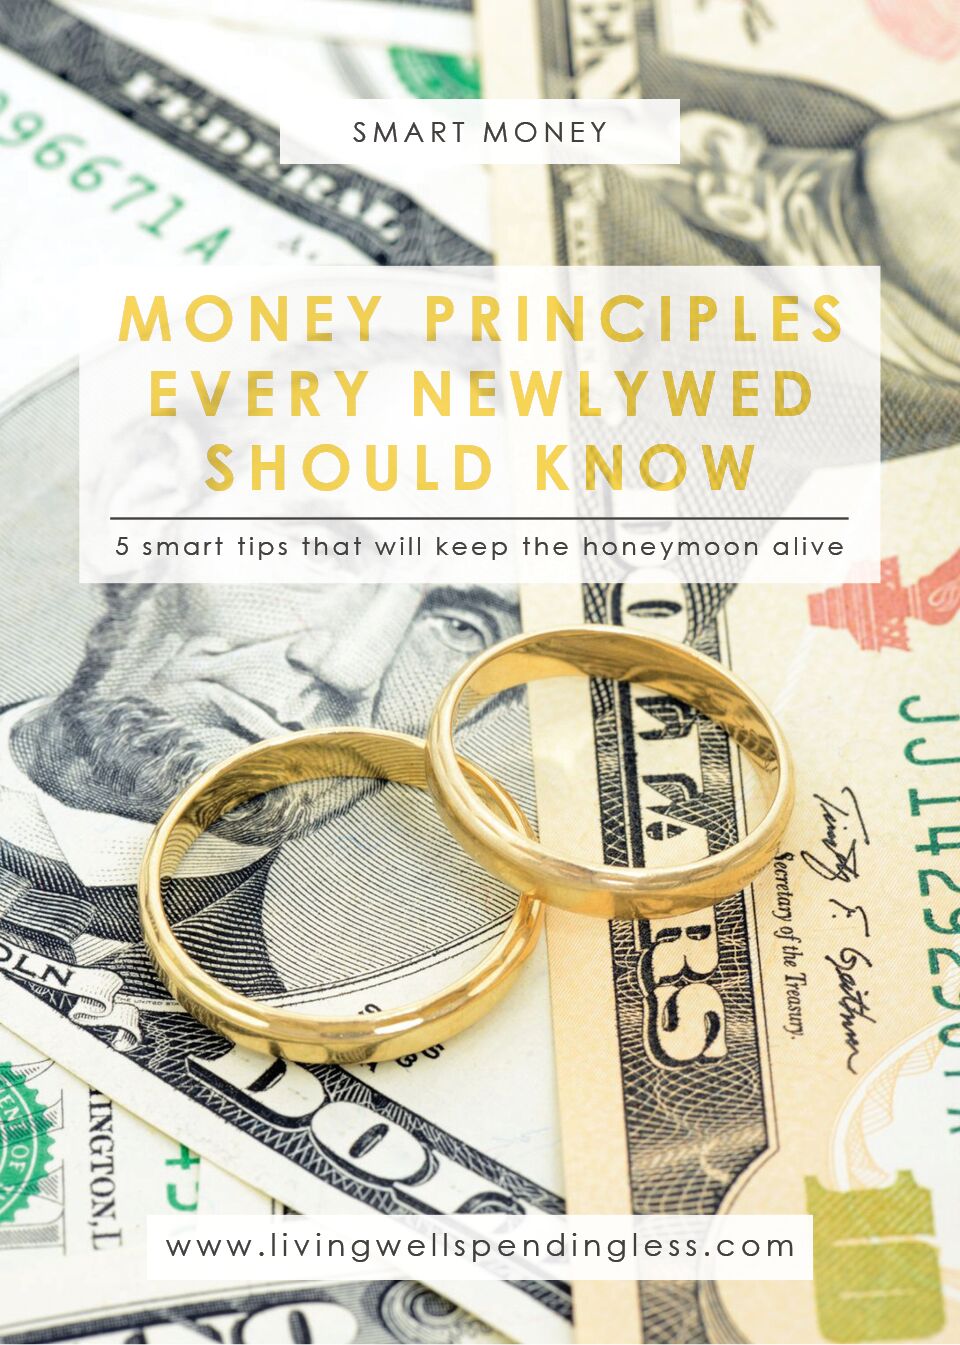 Money Principles Every Newlywed Should Know | Marriage | Money Saving Tips | Financial Management